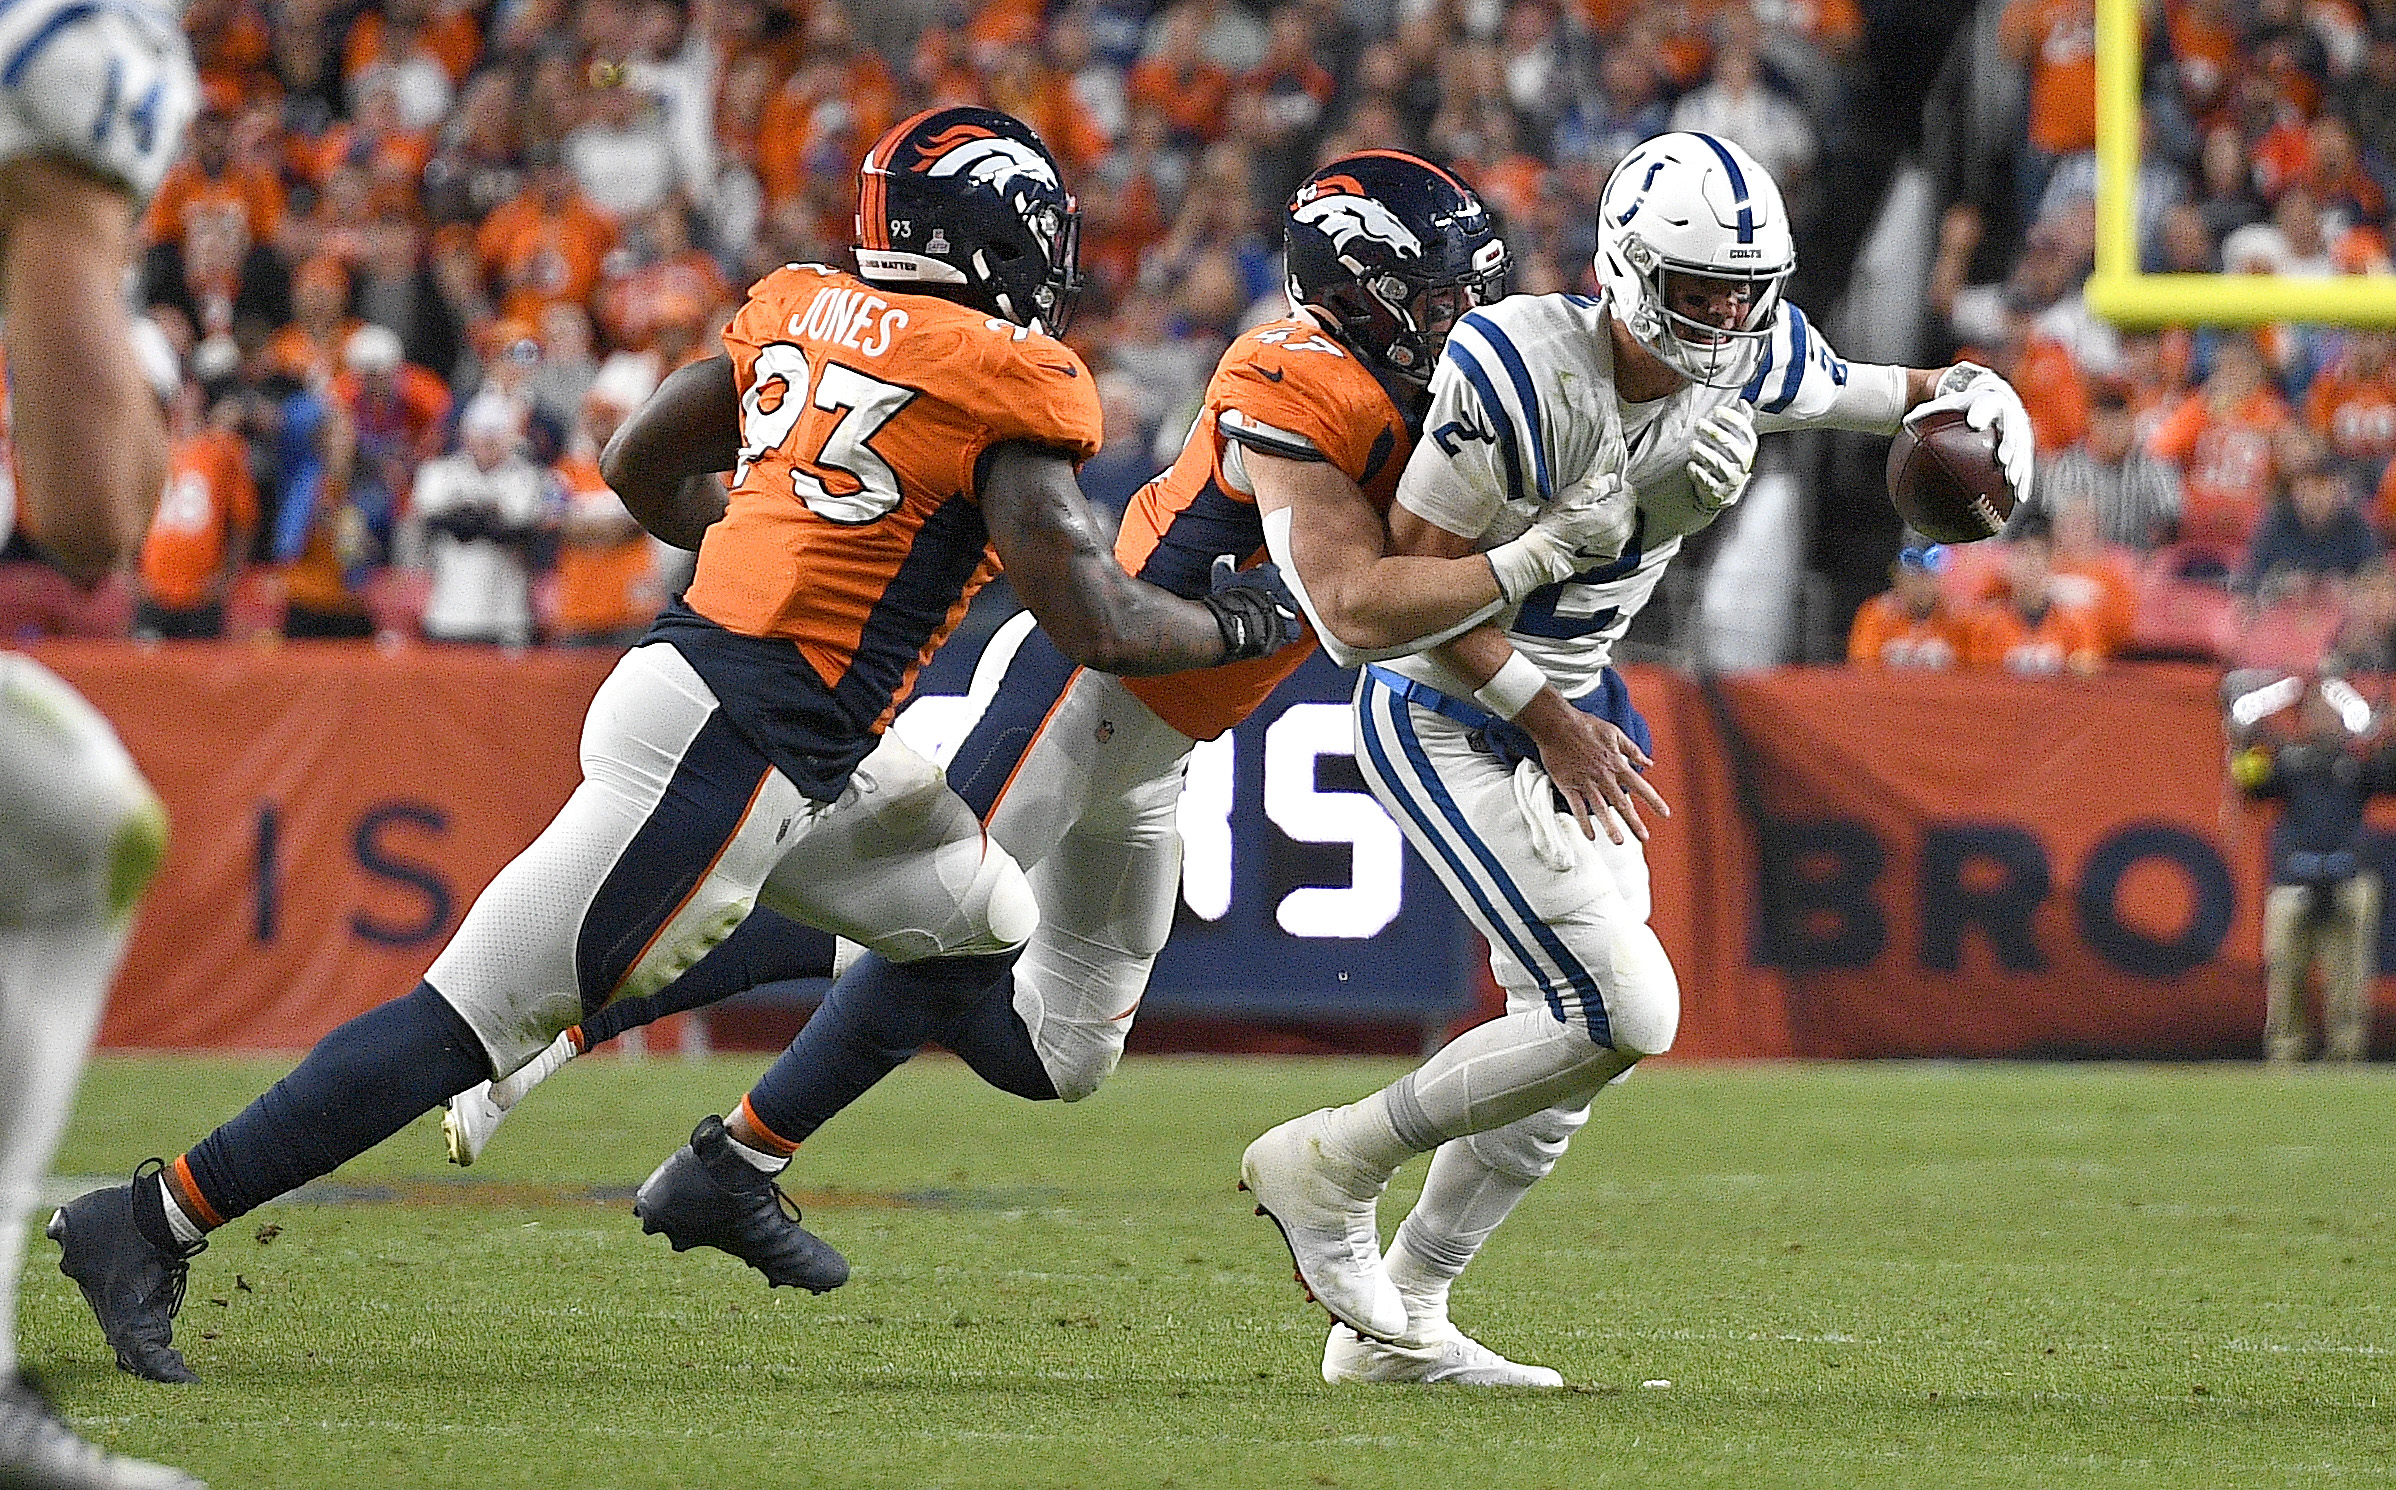 Quarterback Matt Ryan (R) of the Indianapolis Colts is sacked in the game against the Denver Broncos at Mile High in Denver, Colorado, October 6, 2022. /CFP